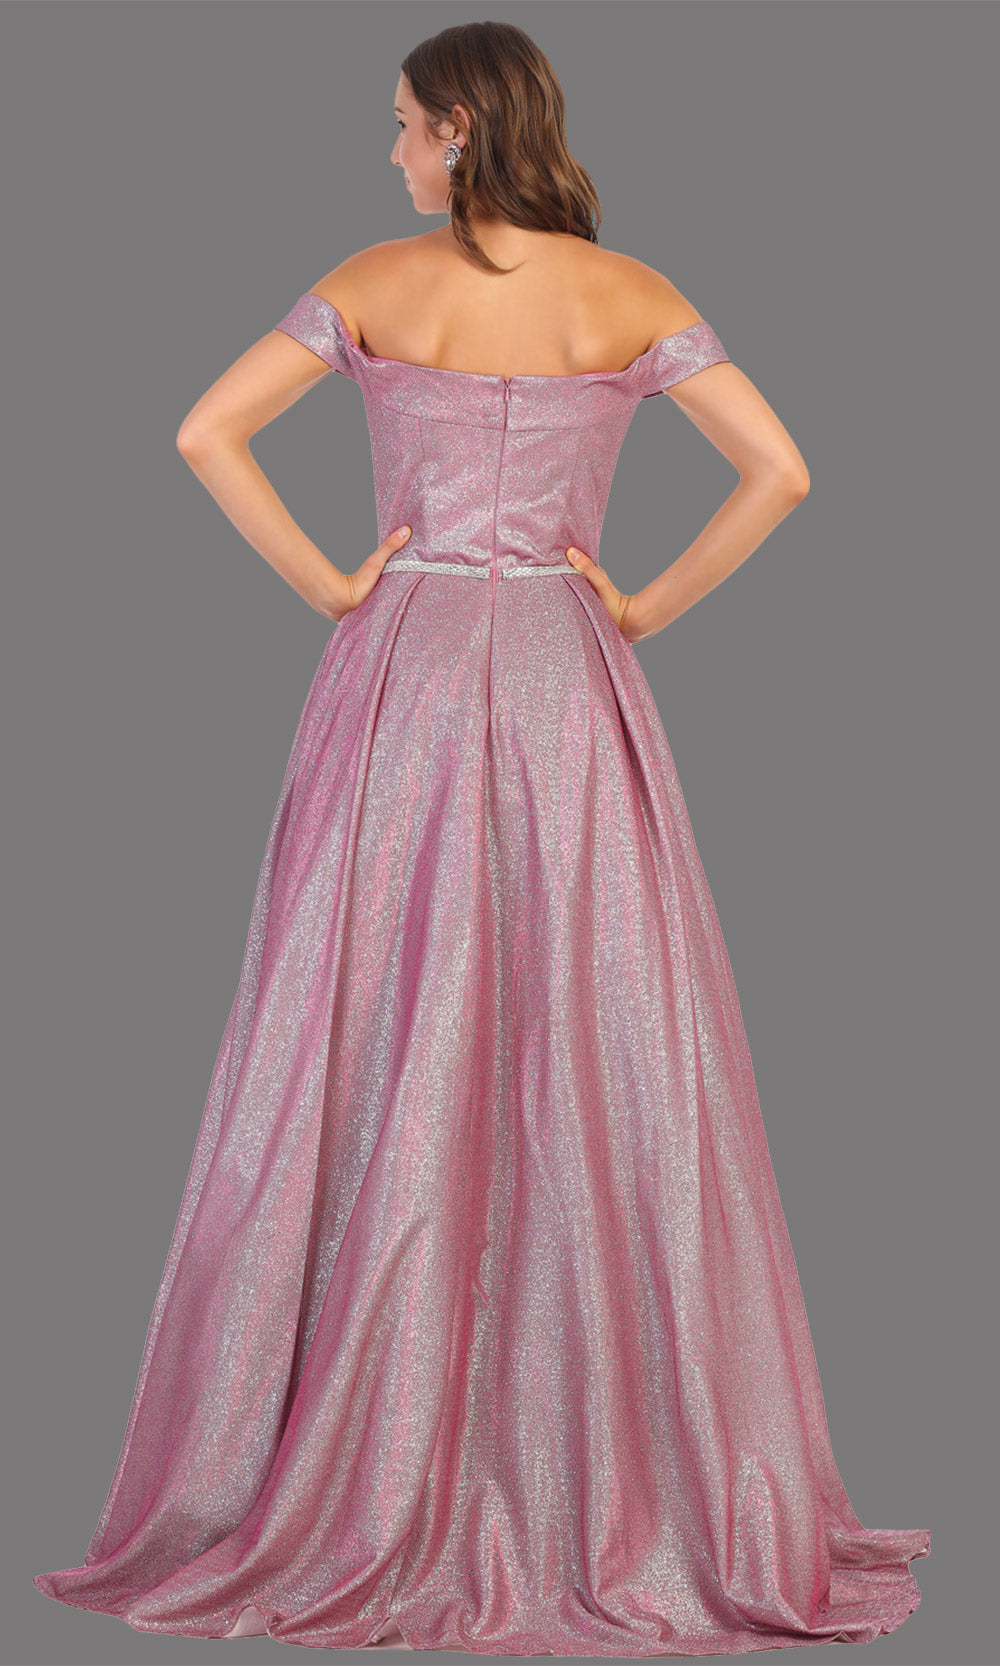 Mayqueen RQ7802 long magenta off shoulder flowy metallic glitter dress. Perfect magenta dress for prom, engagement dress, e-shoot dress, formal wedding guest dress, debut, quinceanera, sweet 16, gala. Plus sizes avail in this pink semi ballgown-b.jpg